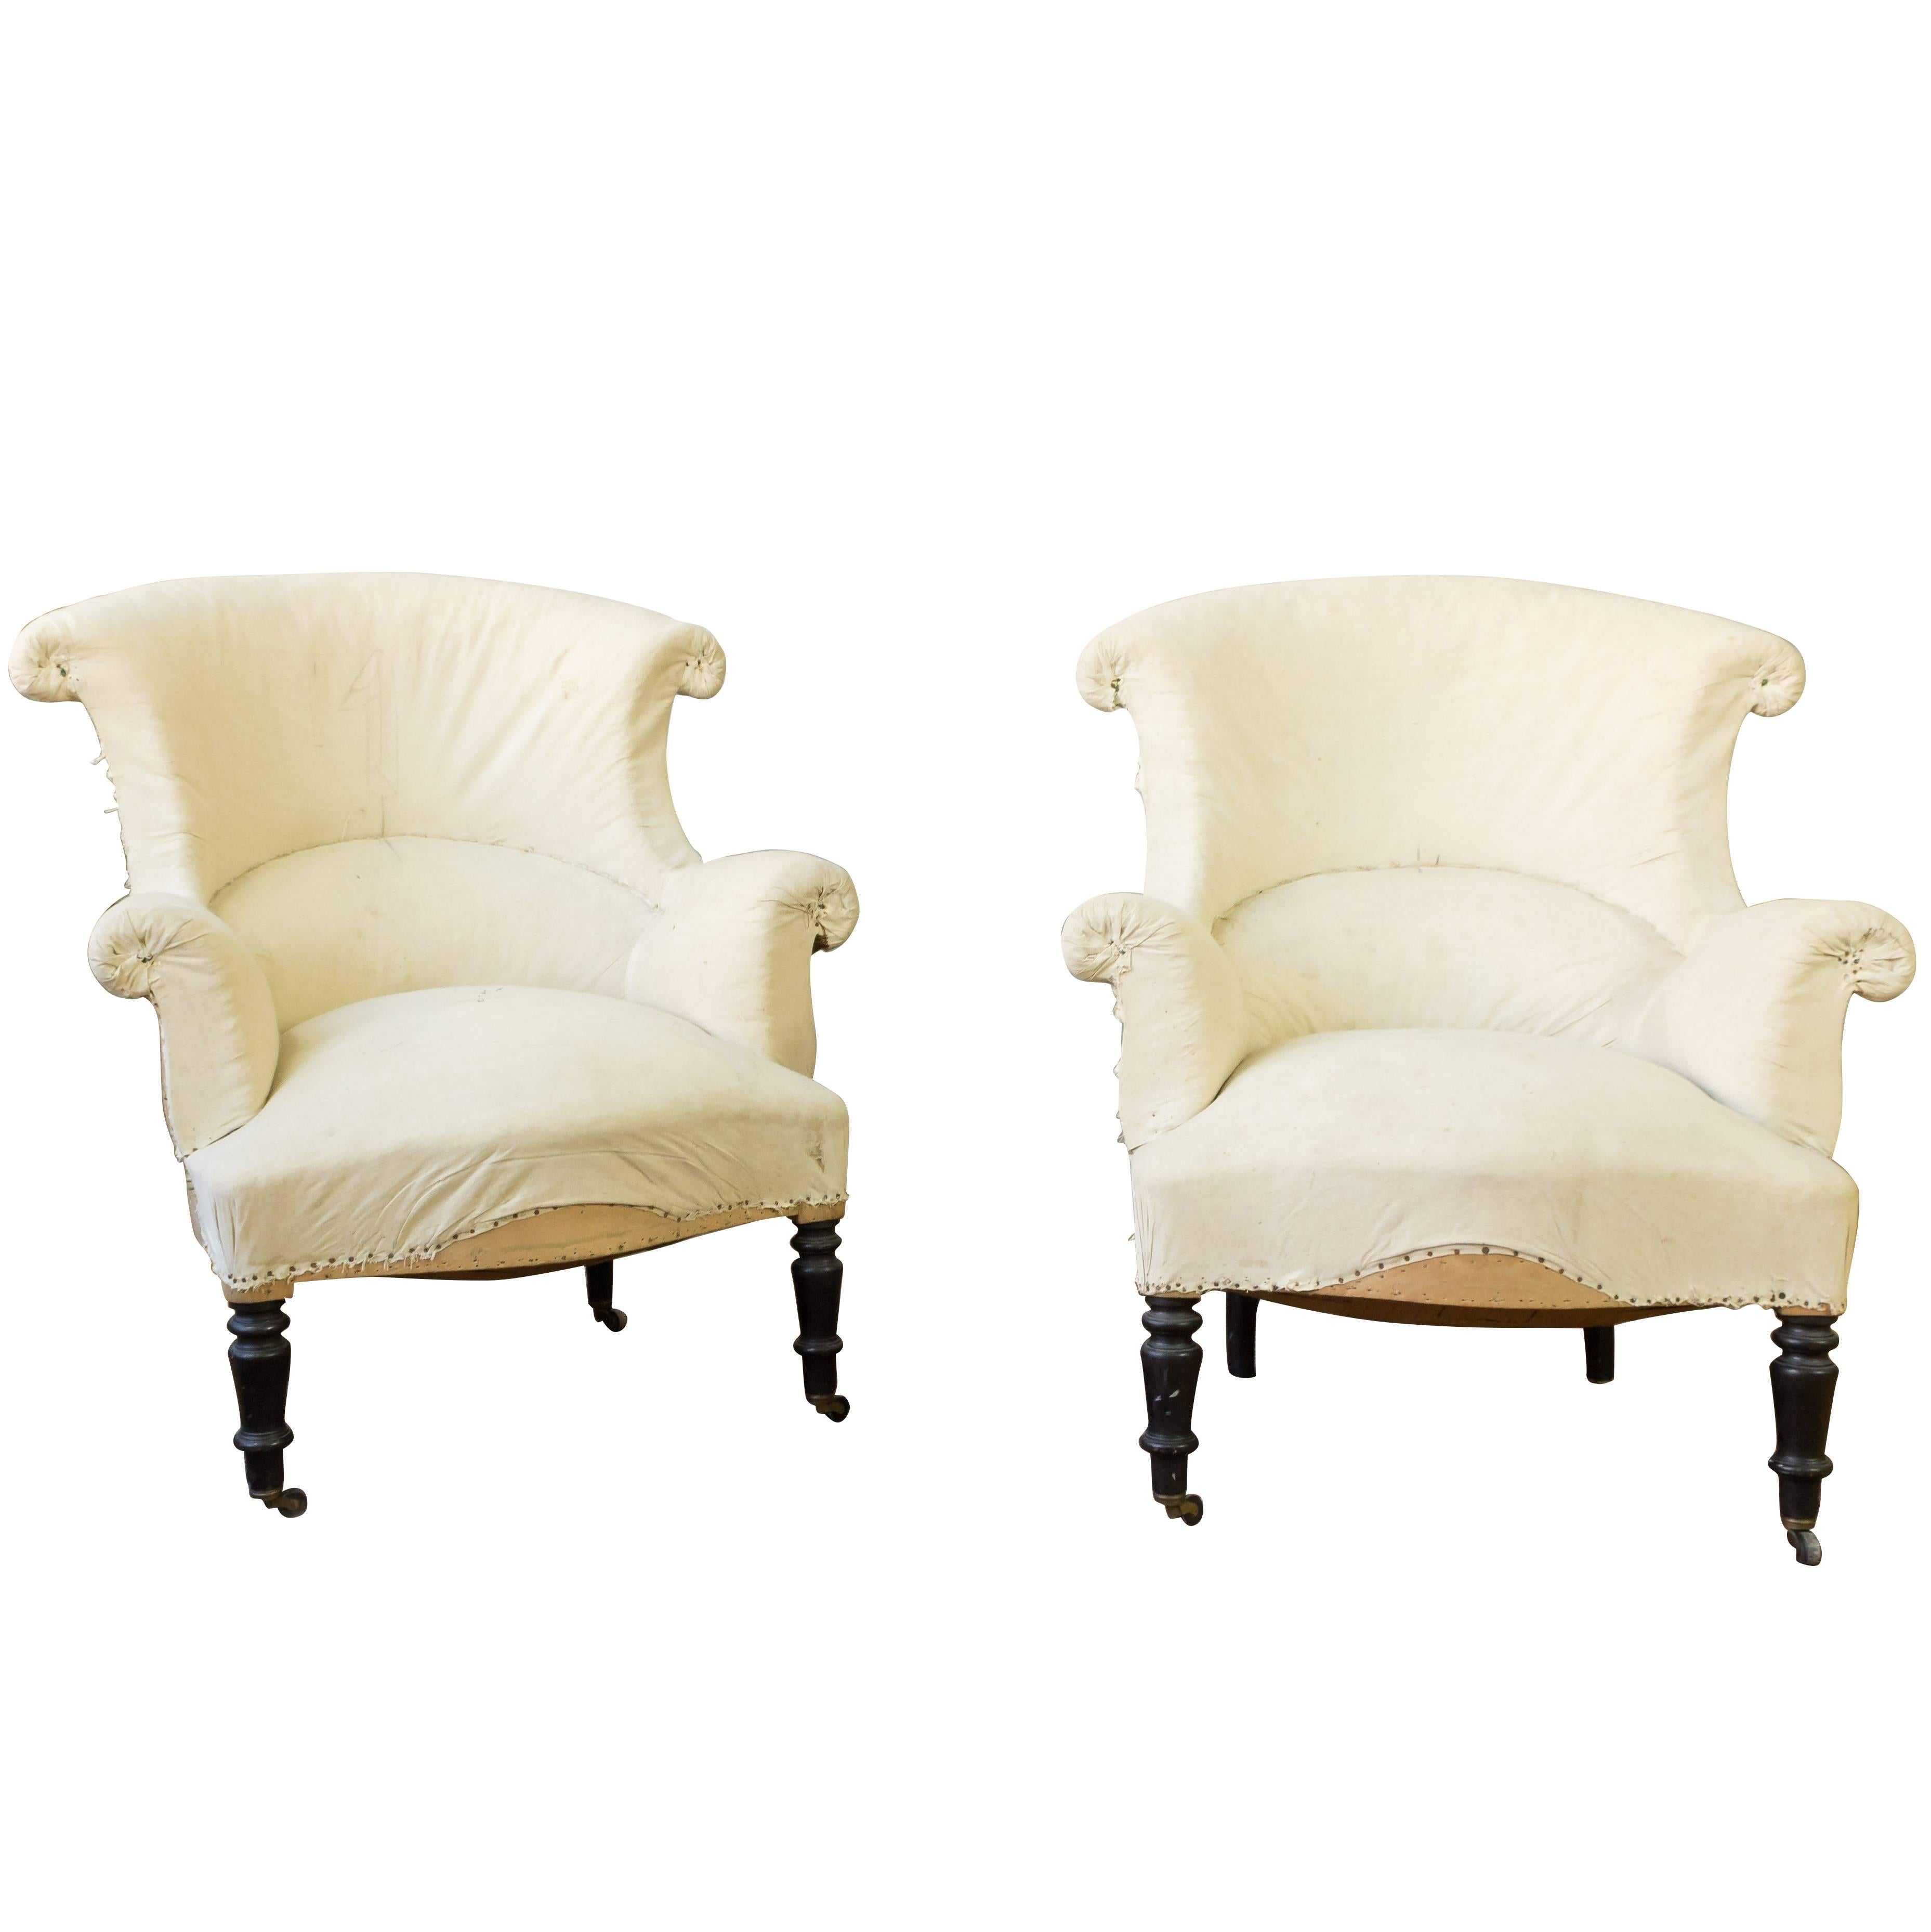 19th Century Pair of Scrolled Back, Napoleon III Armchairs